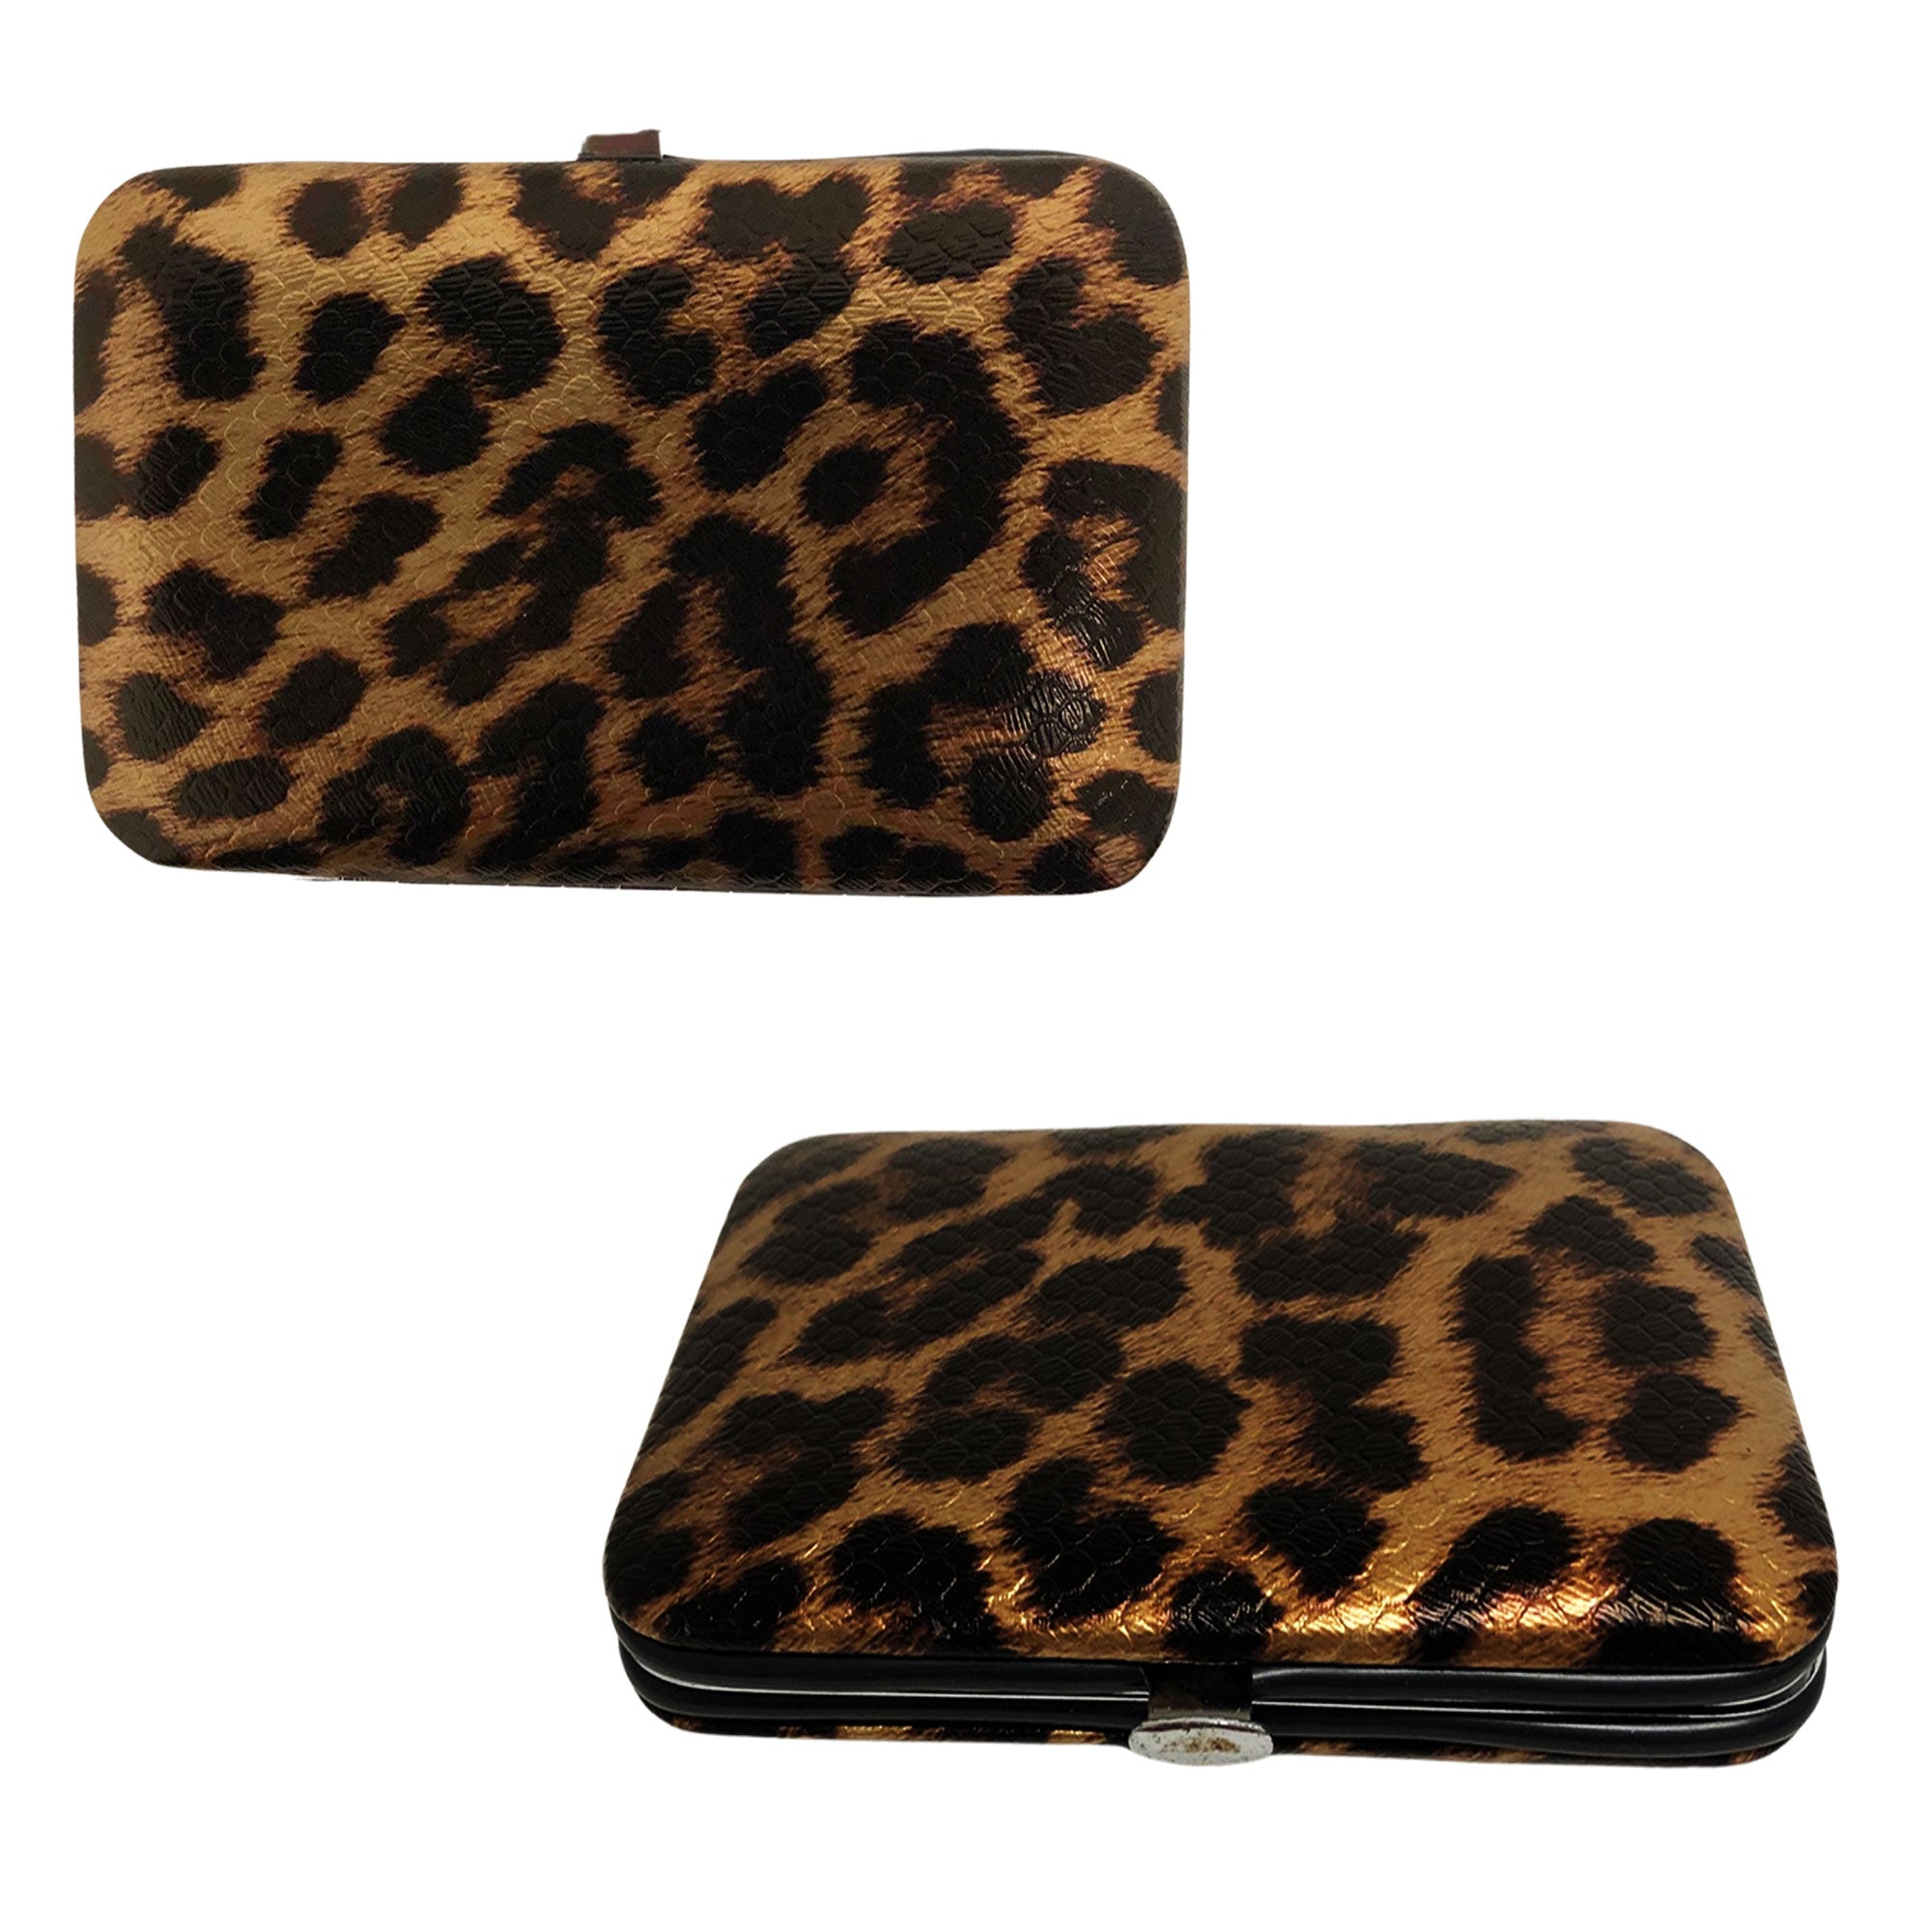 CLEARANCE MANICURE SET IN GOLD LEOPARD CASE (CASE OF 24 - $2.50 / PIECE)  Wholesale 9 Piece Stainless Steel Manicure Set in Gold Leopard SKU: 9699-LEO-GOLD-24